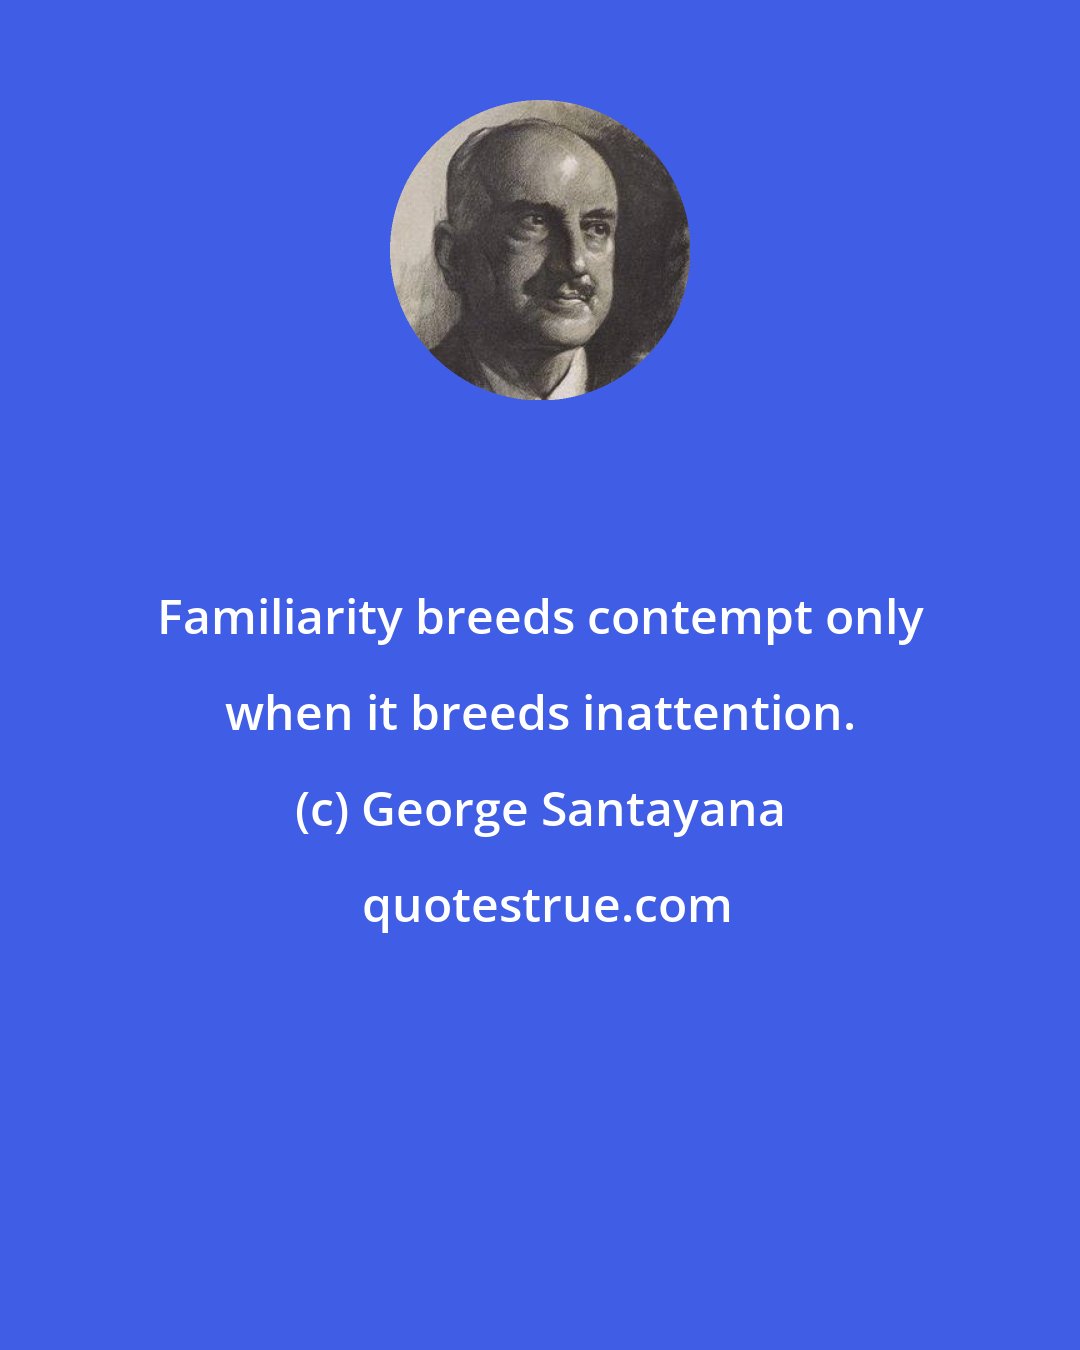 George Santayana: Familiarity breeds contempt only when it breeds inattention.